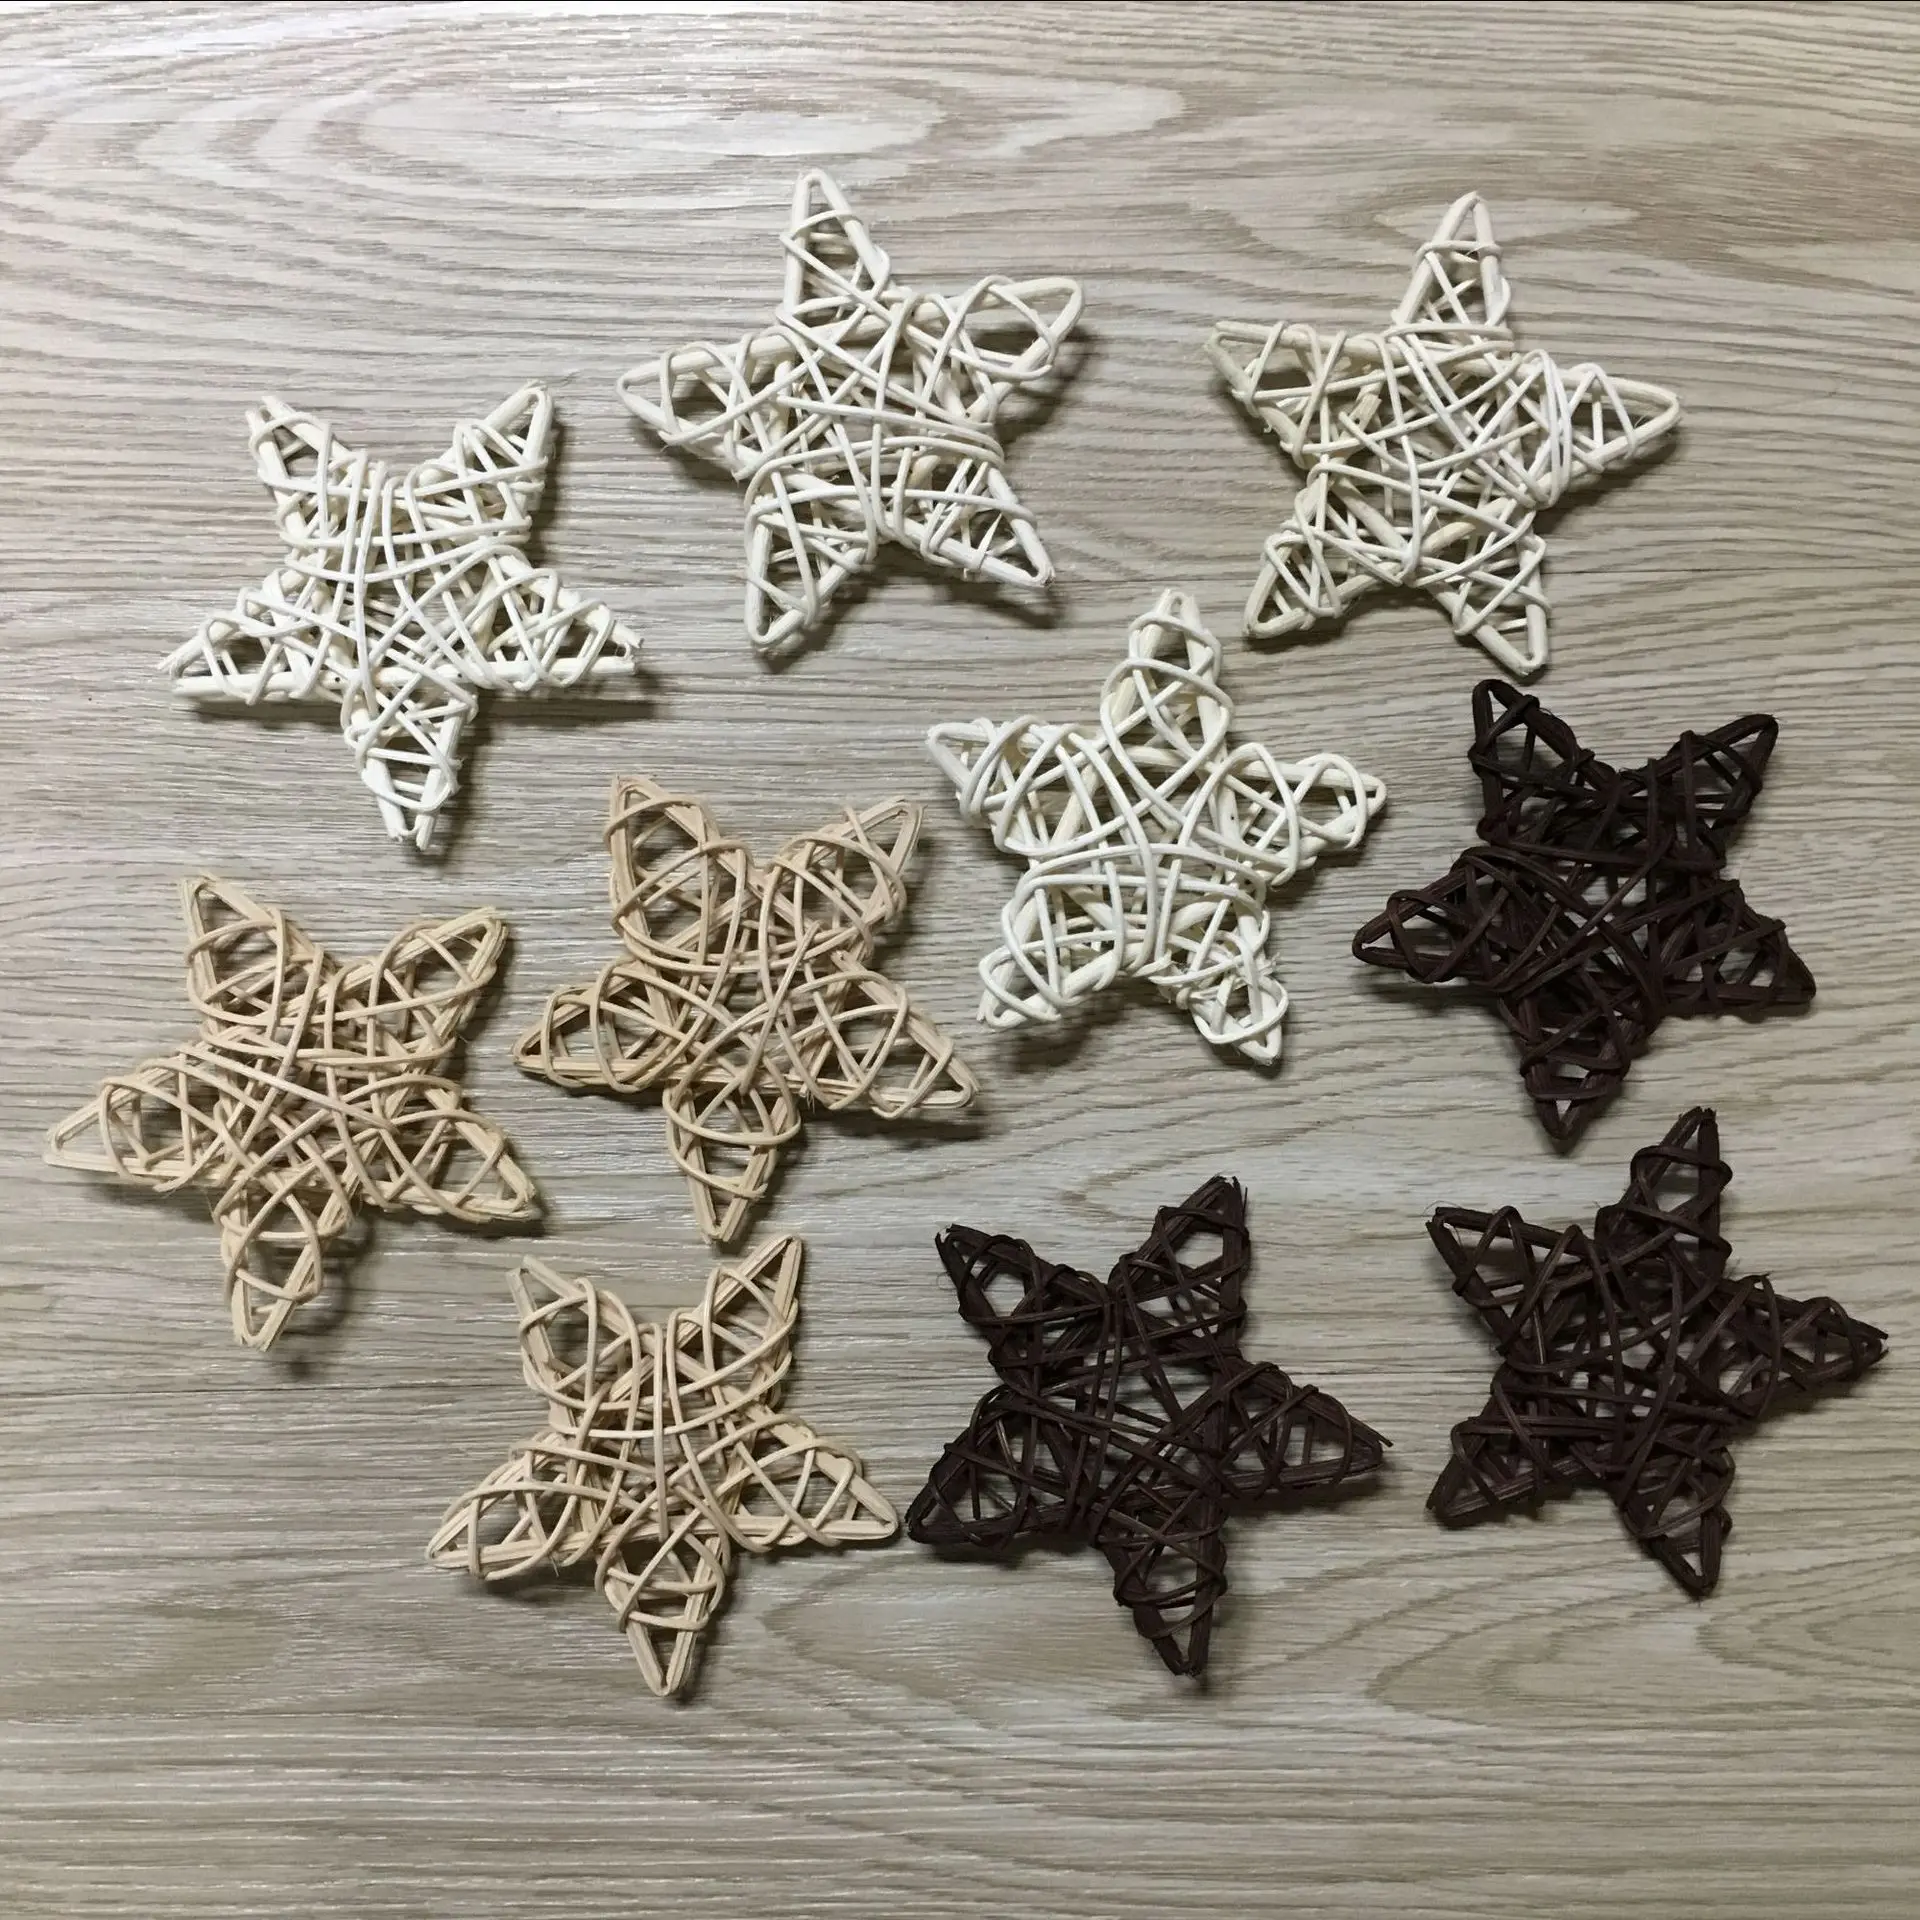 6cm Crafts DIY Ornaments Birthday Rattan Stars Colorful Home Decoration Office 